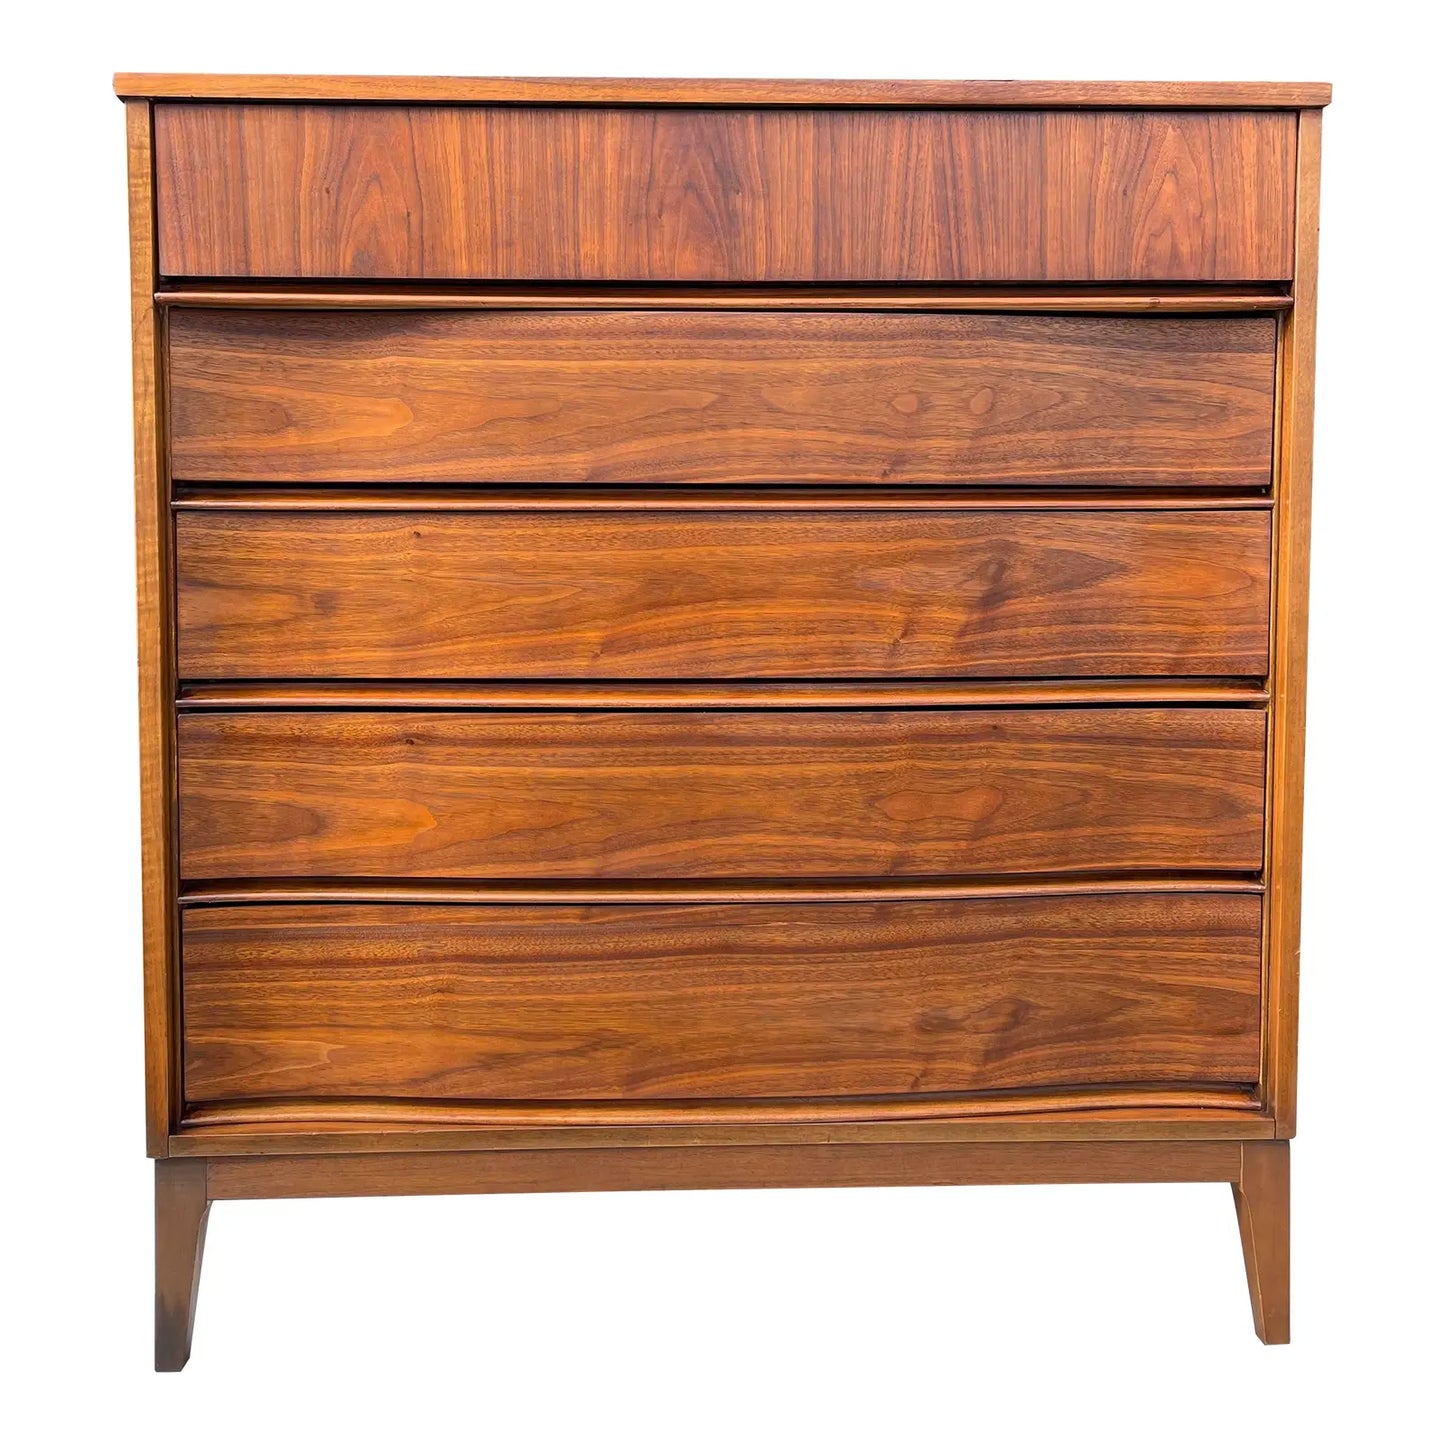 1960s Mid-Century Modern Walnut Highboy Dresser With Curved Front Drawers